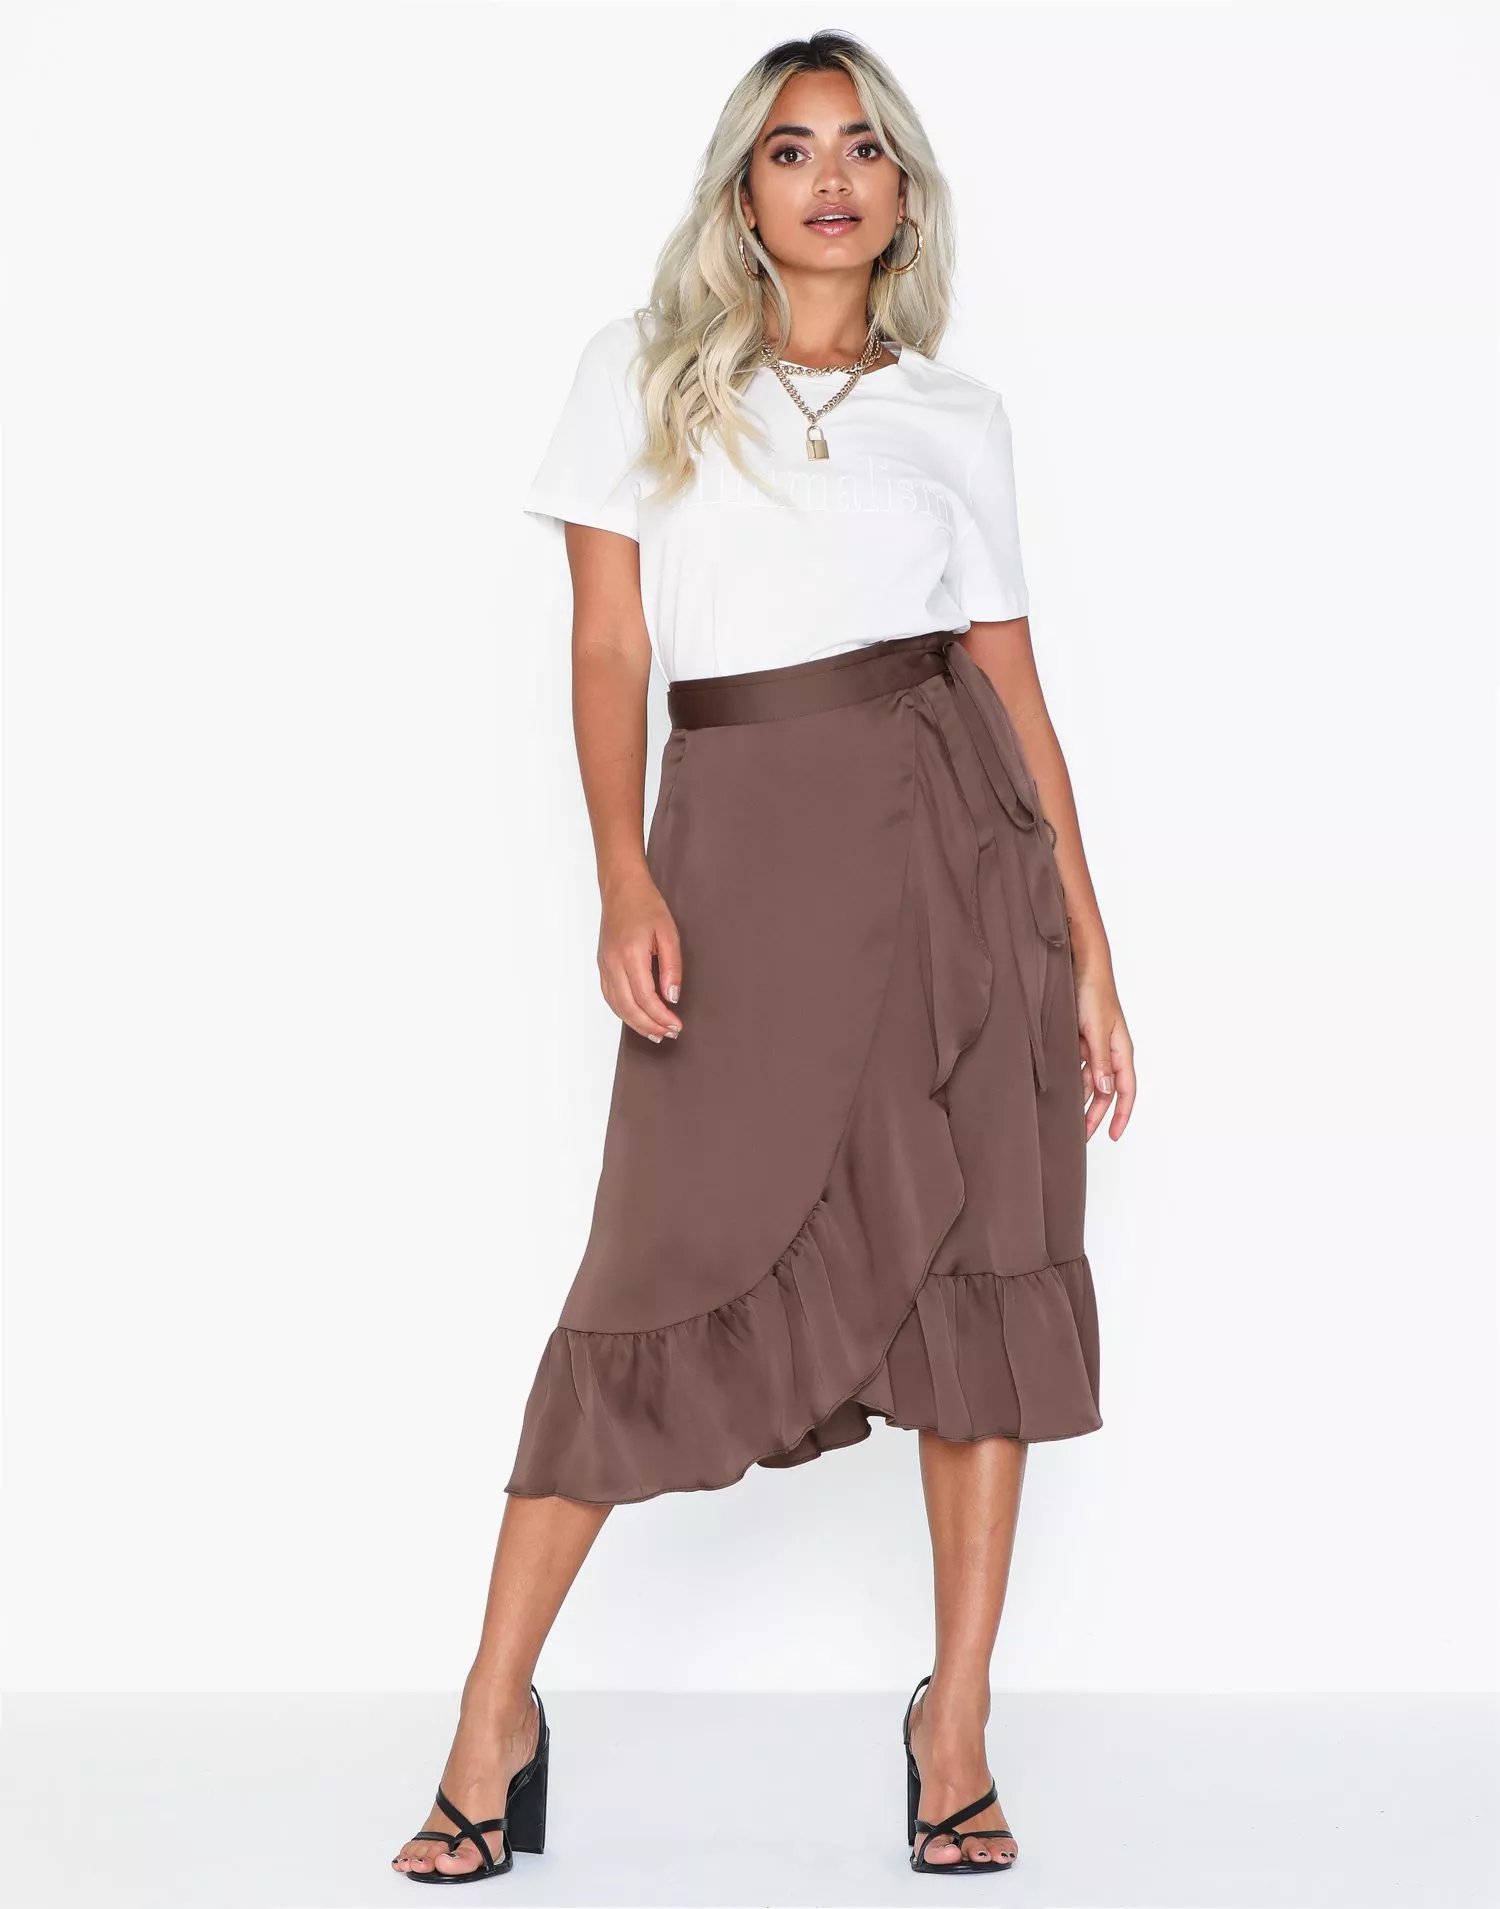 Buy Neo Noir Solid Skirt - Toffee | Nelly.com